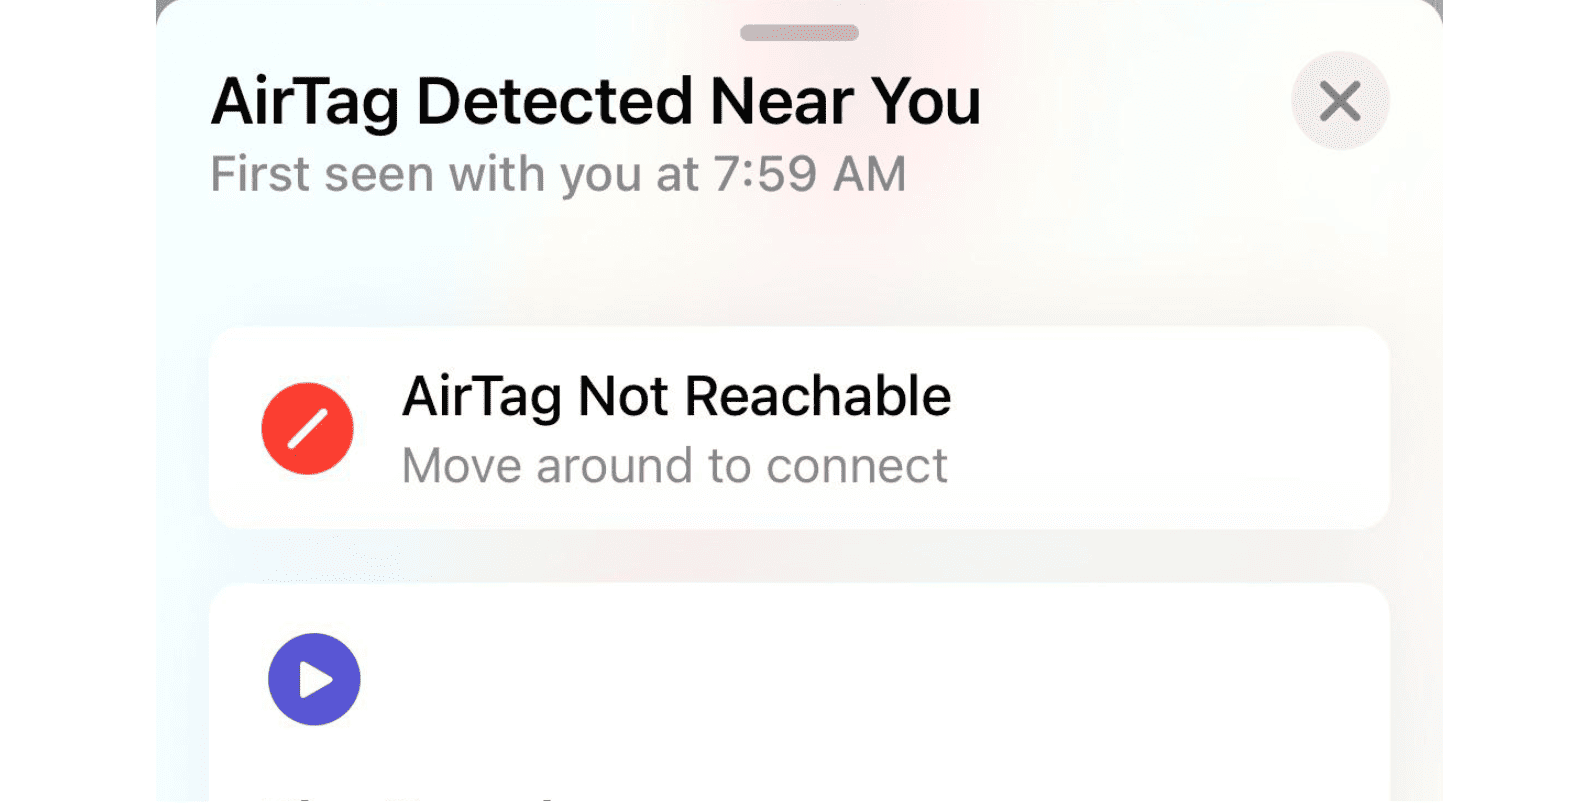 Android users can read an AirTag's 'Lost Mode' message via NFC